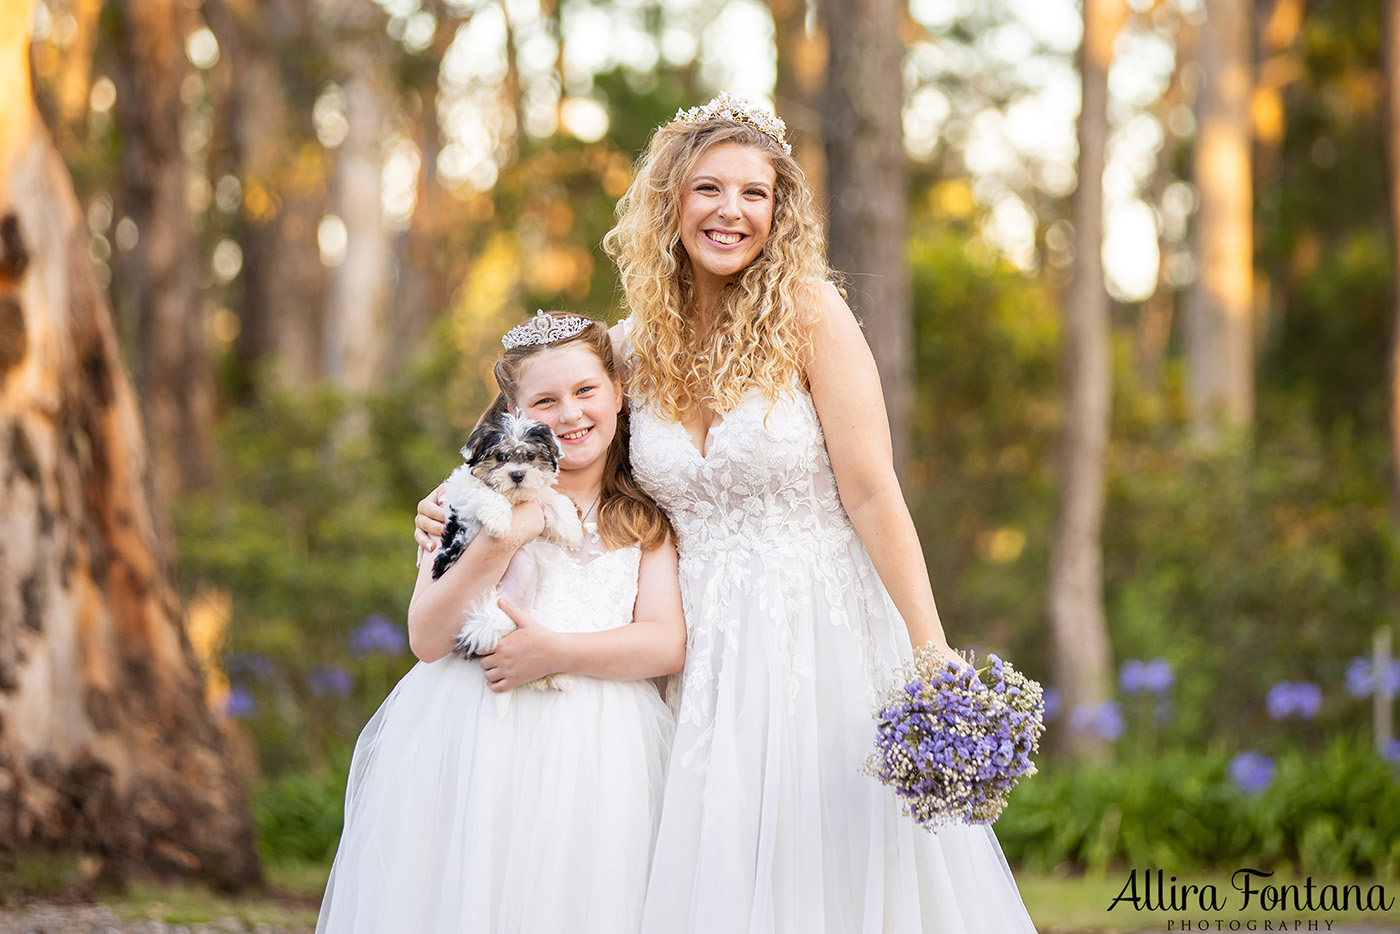 Erin's wedding photo session in Colo Vale 